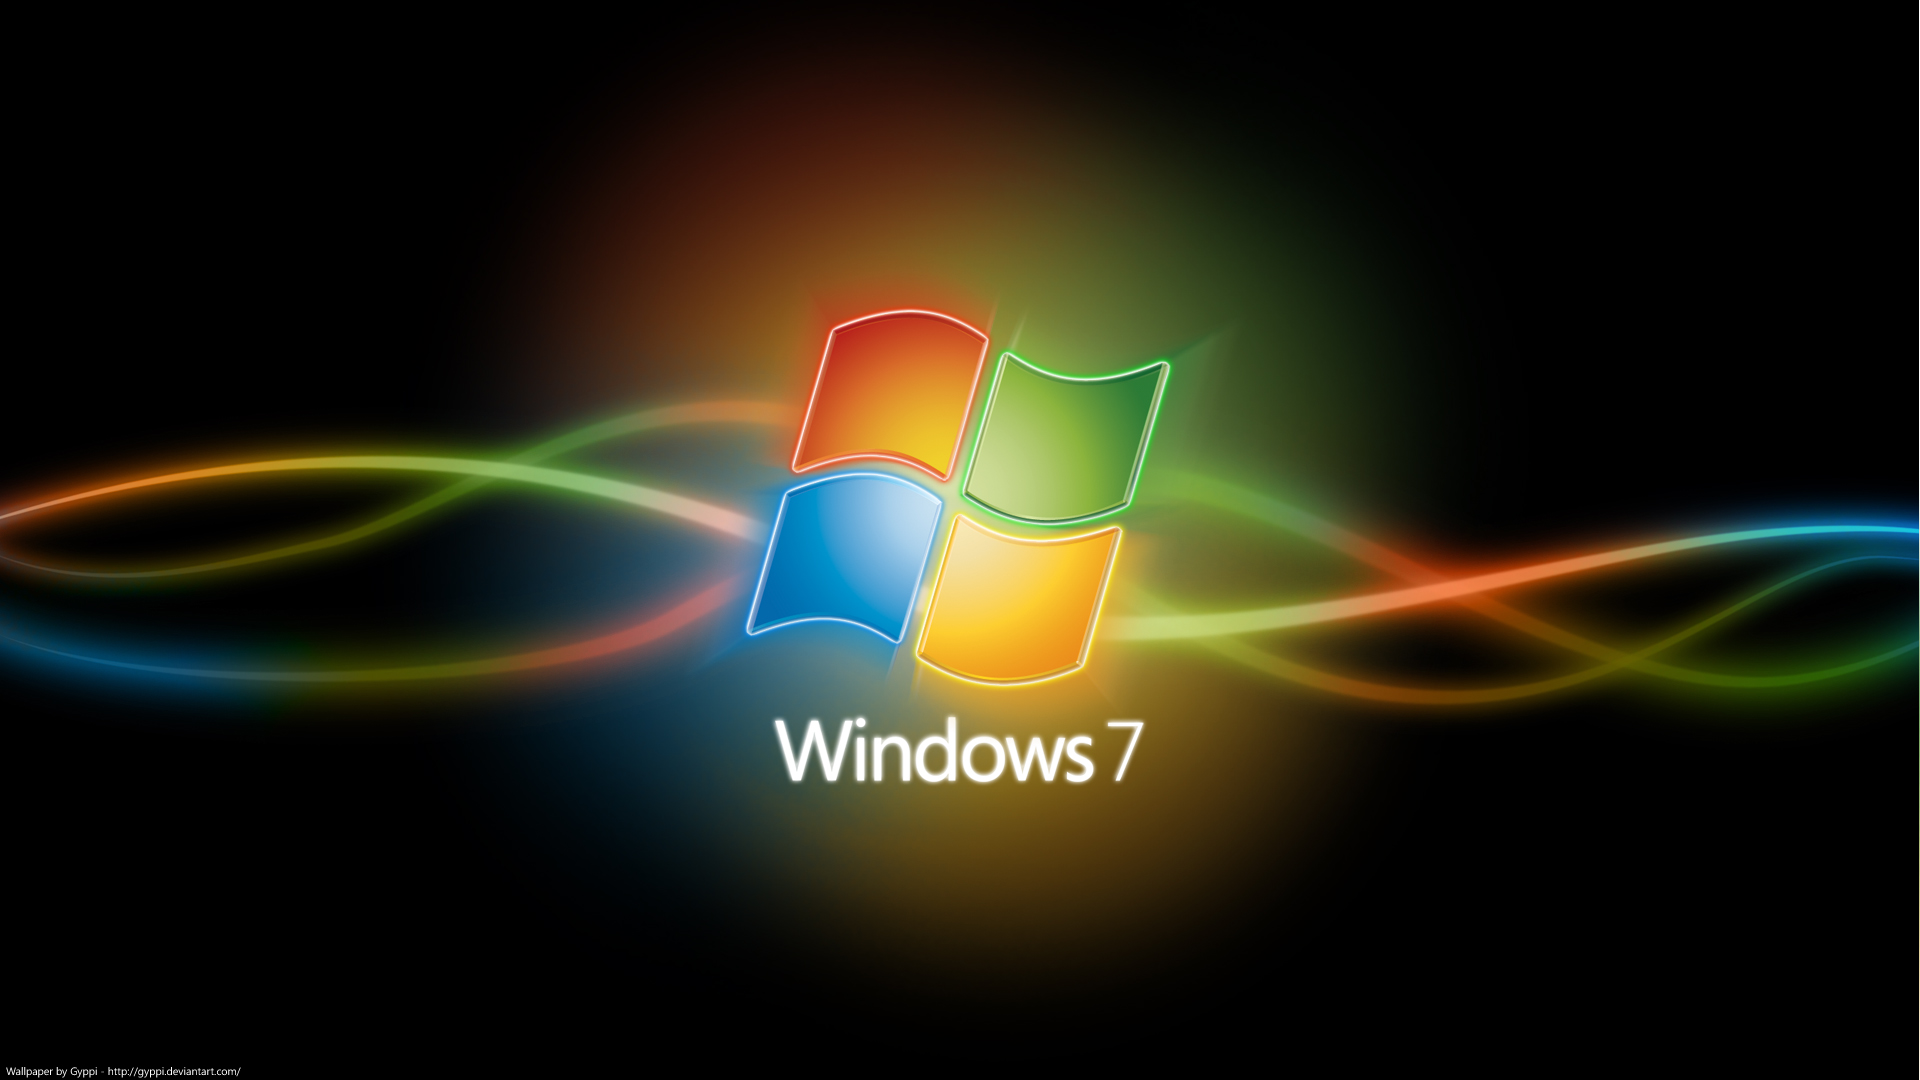 High Definition Windows Wallpaper Background For